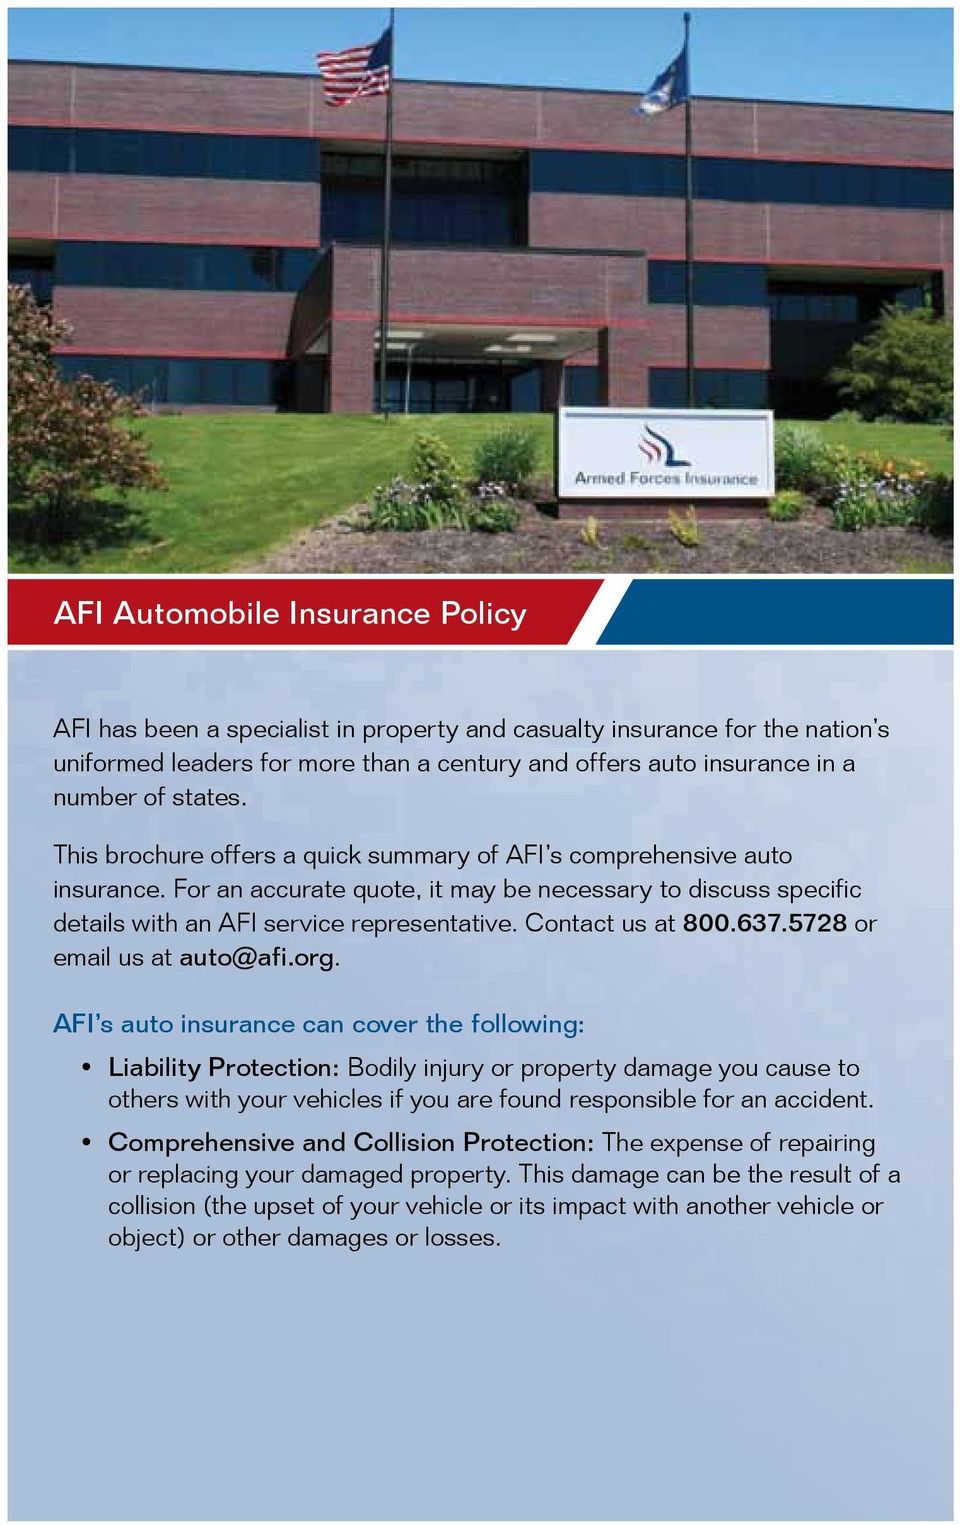 Contact us at 800.637.5728 or email us at auto@afi.org.